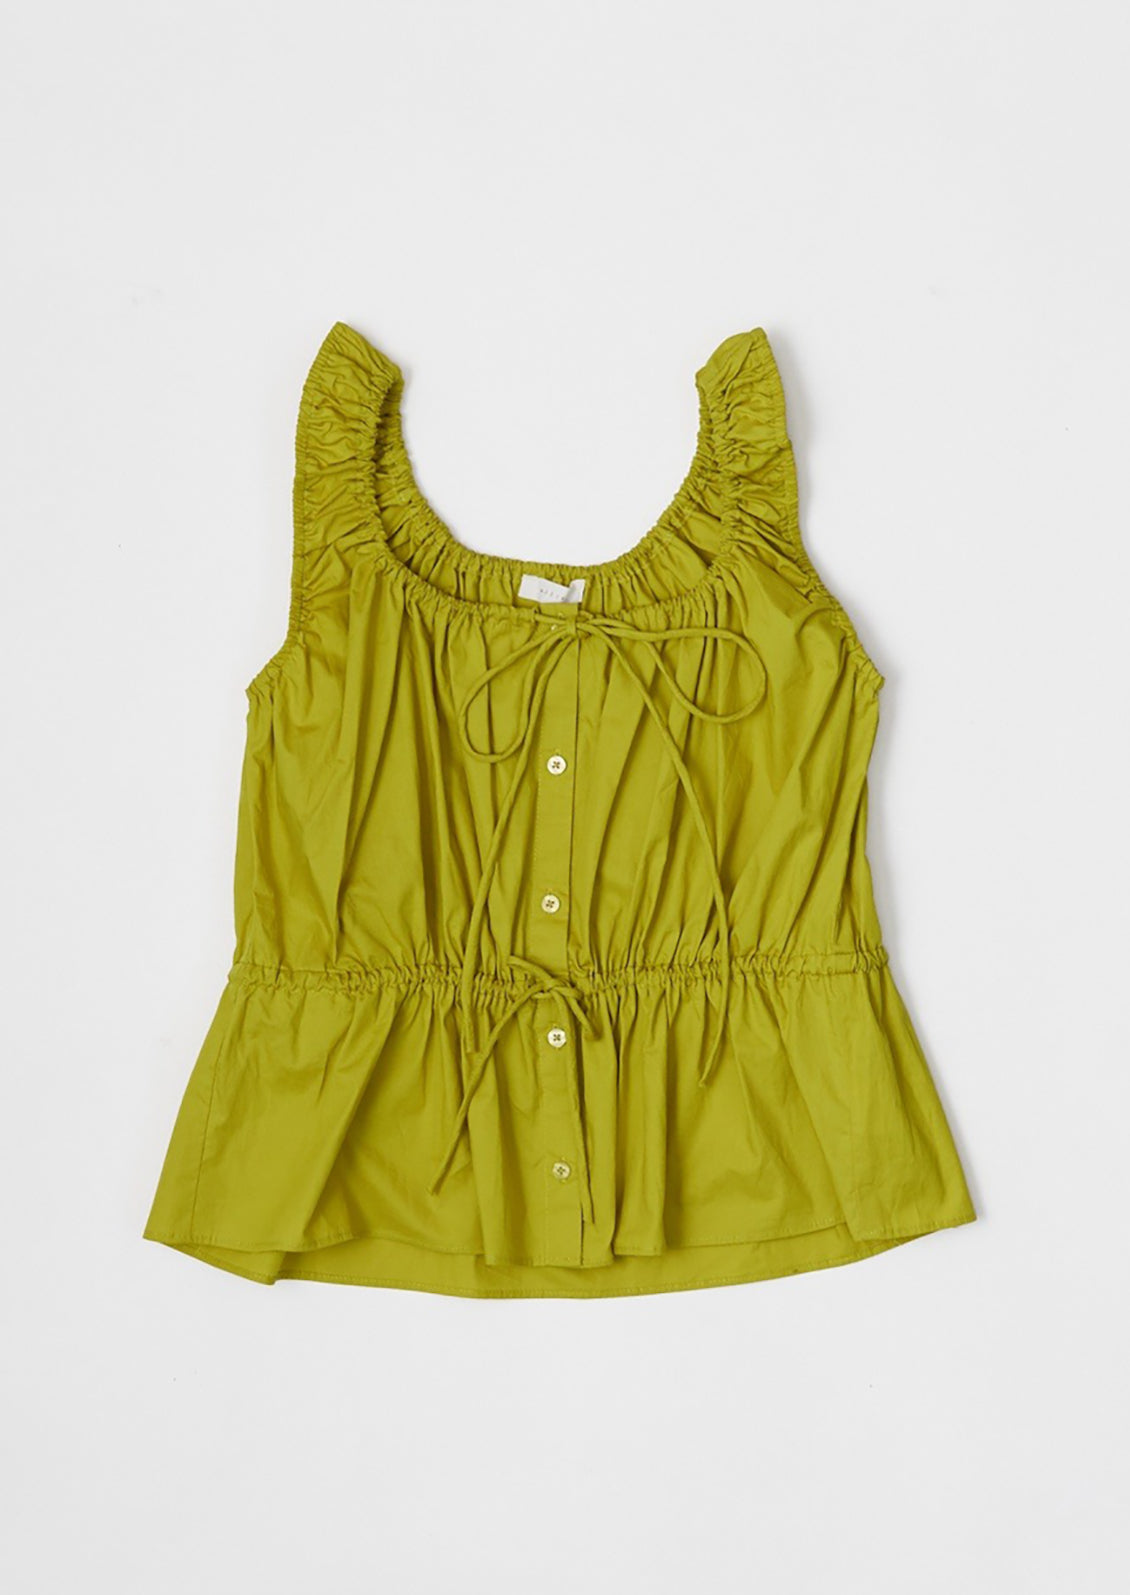 A lime green cinched poplin top. 